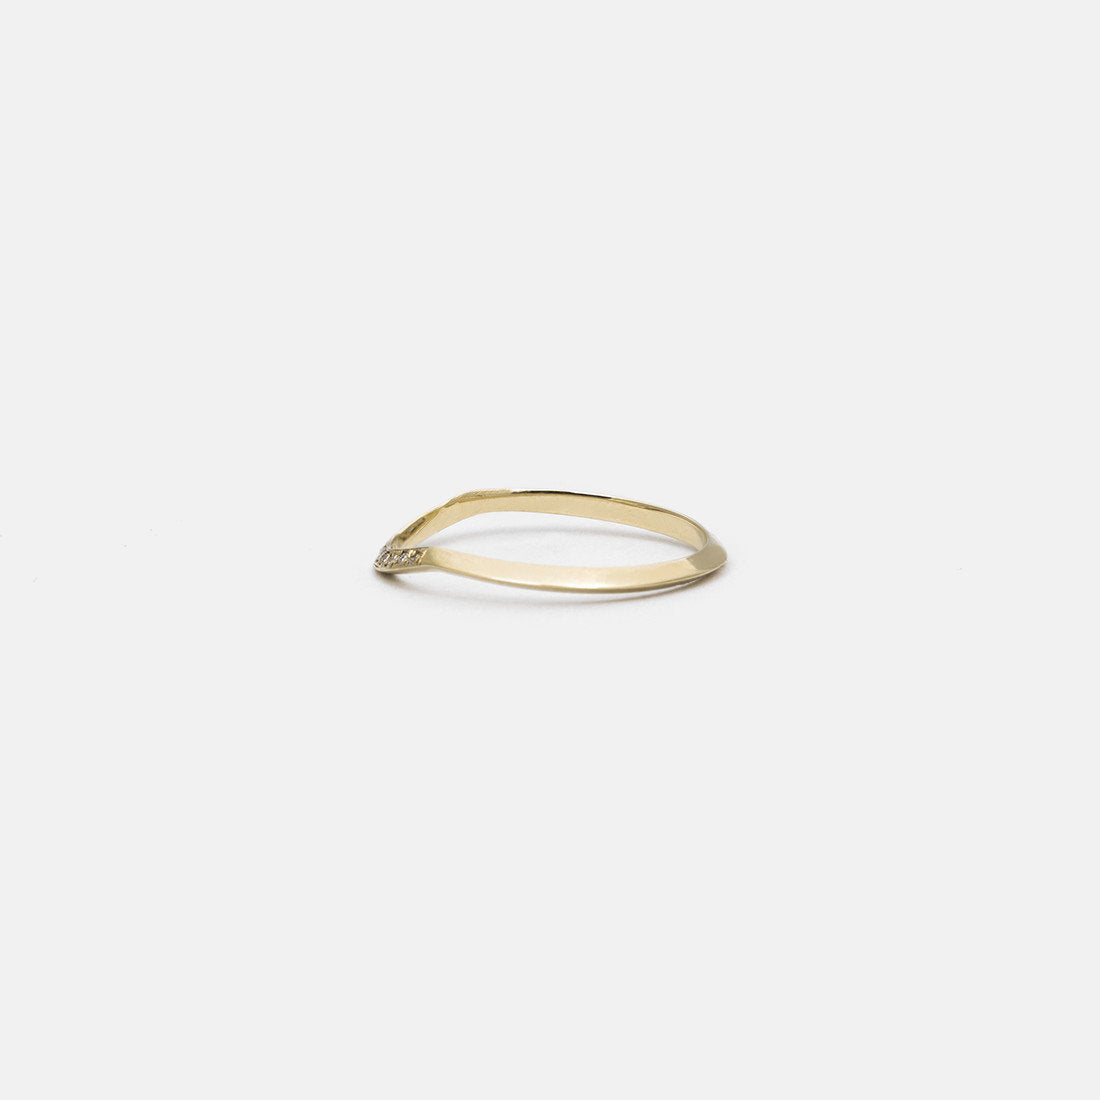 Arba Unconventional Ring in 14k Gold set with White Diamonds By SHW Fine Jewelry NYC